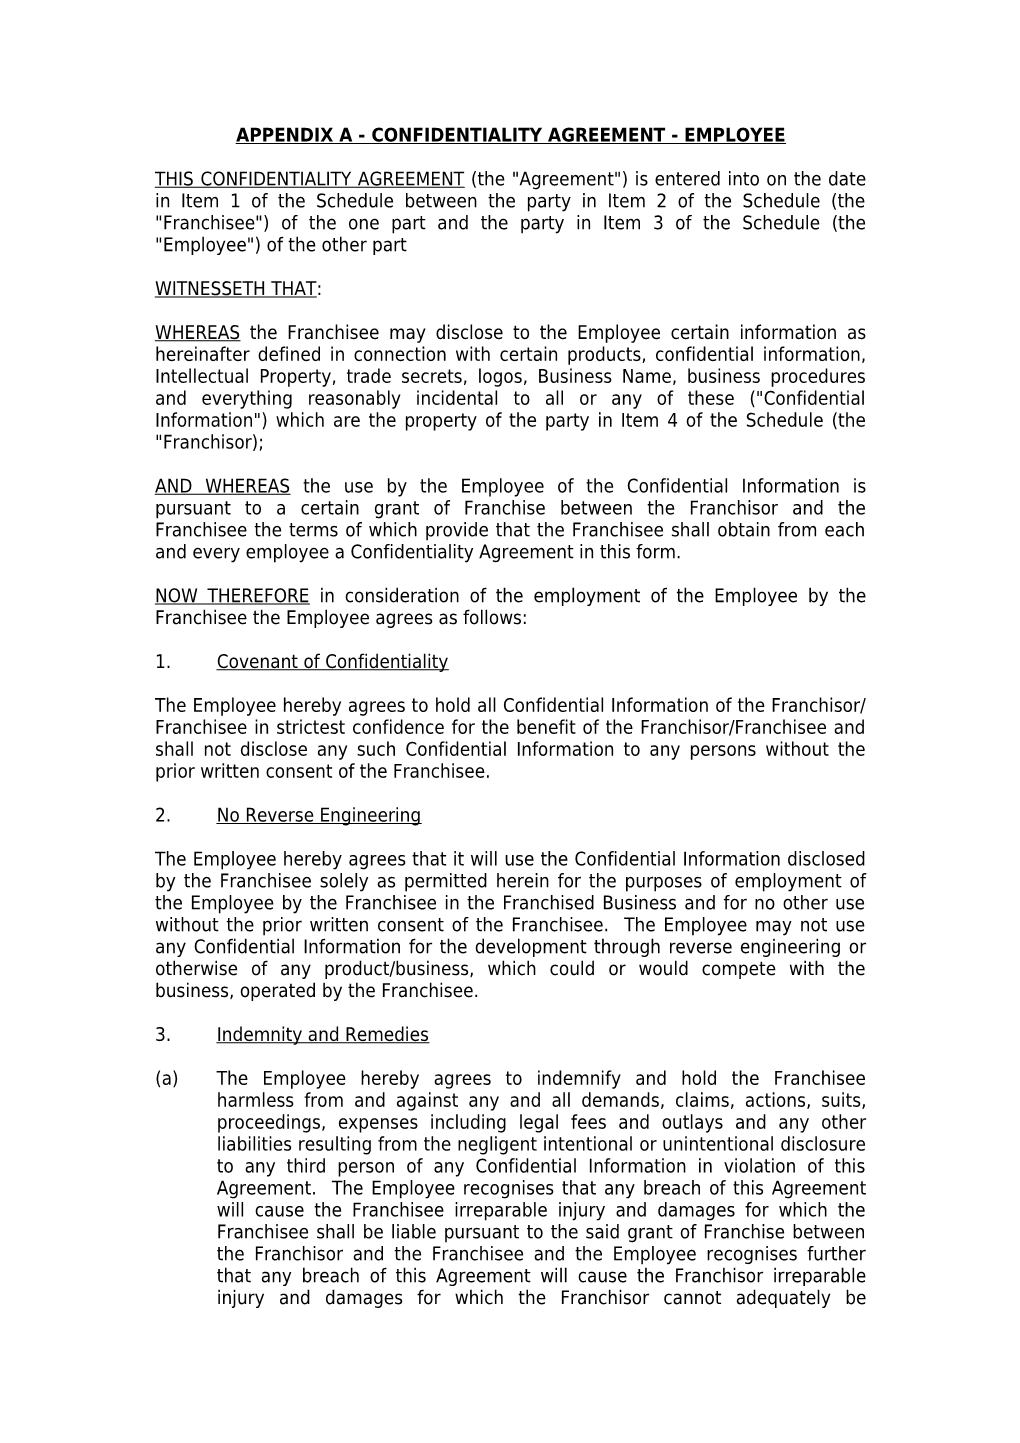 Appendix a - Confidentiality Agreement - Employee